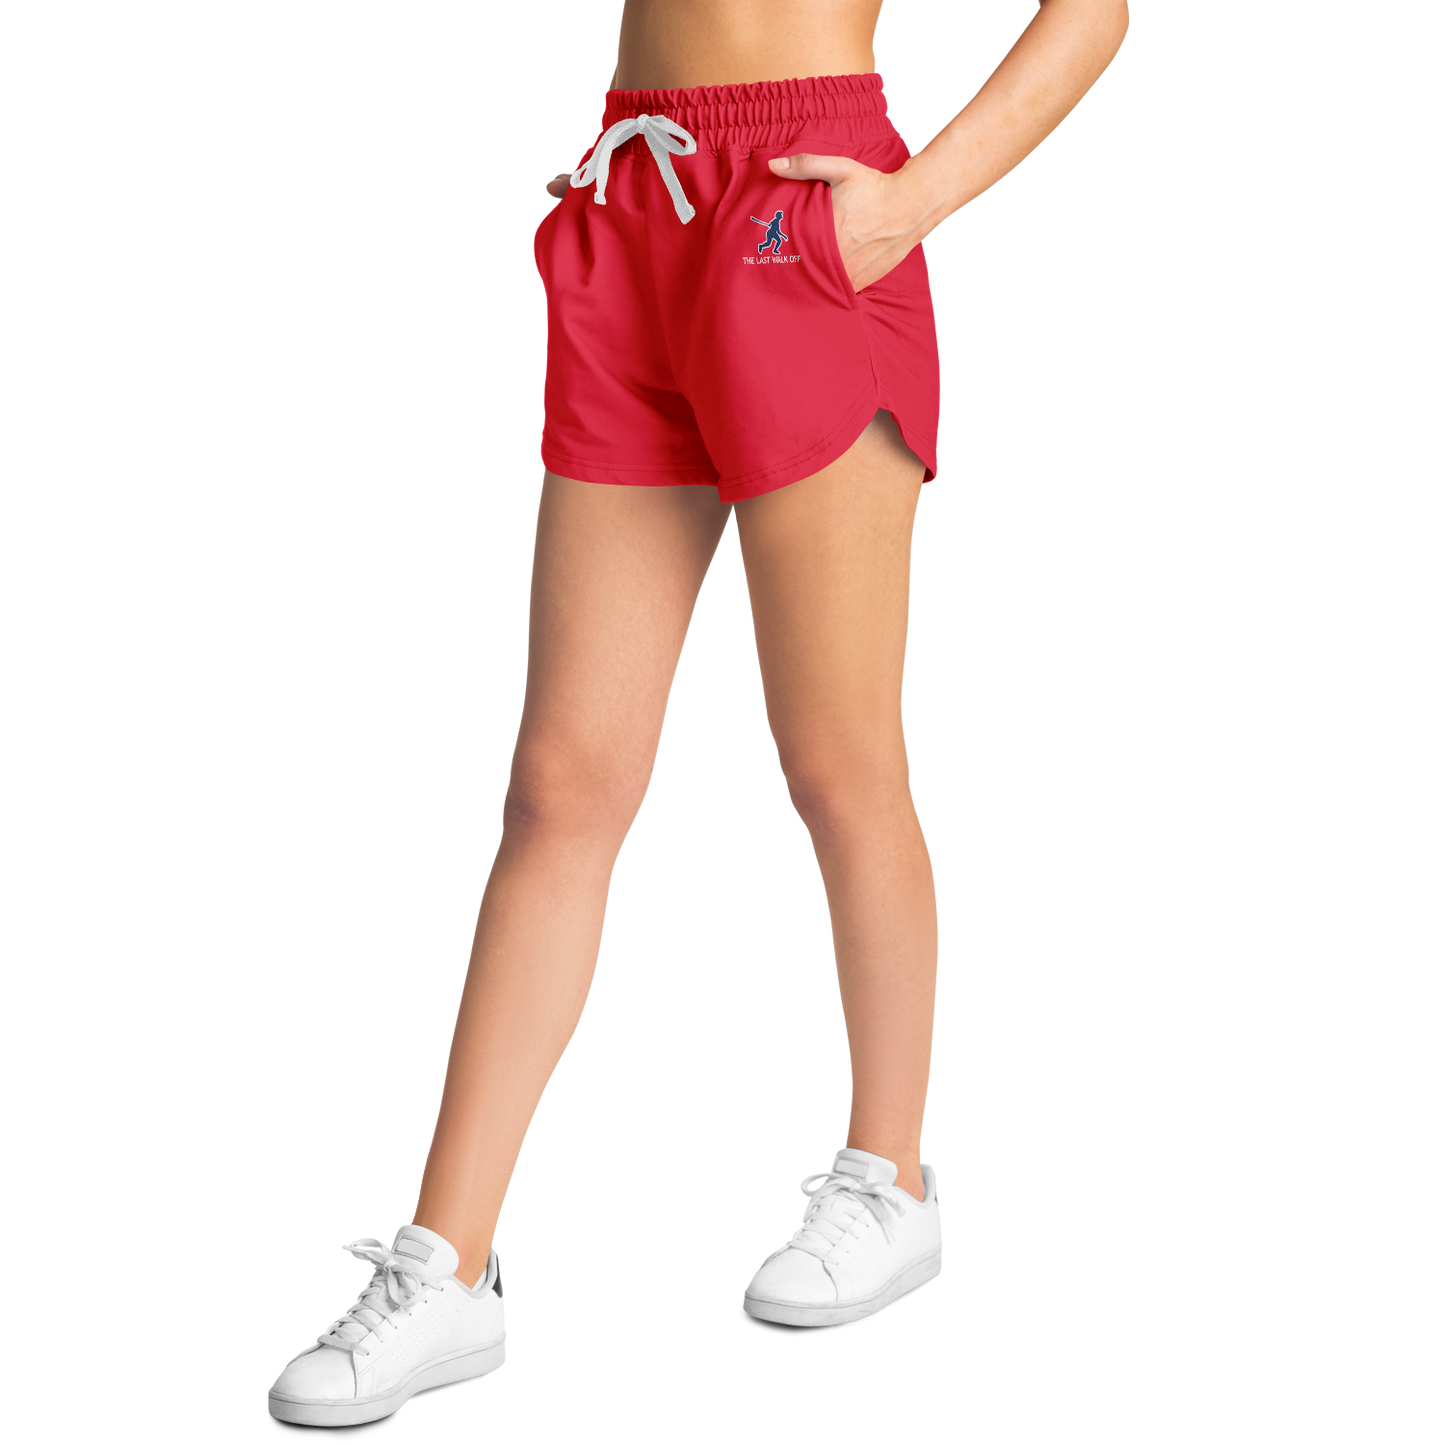 Cleveland Women's Red Shorts